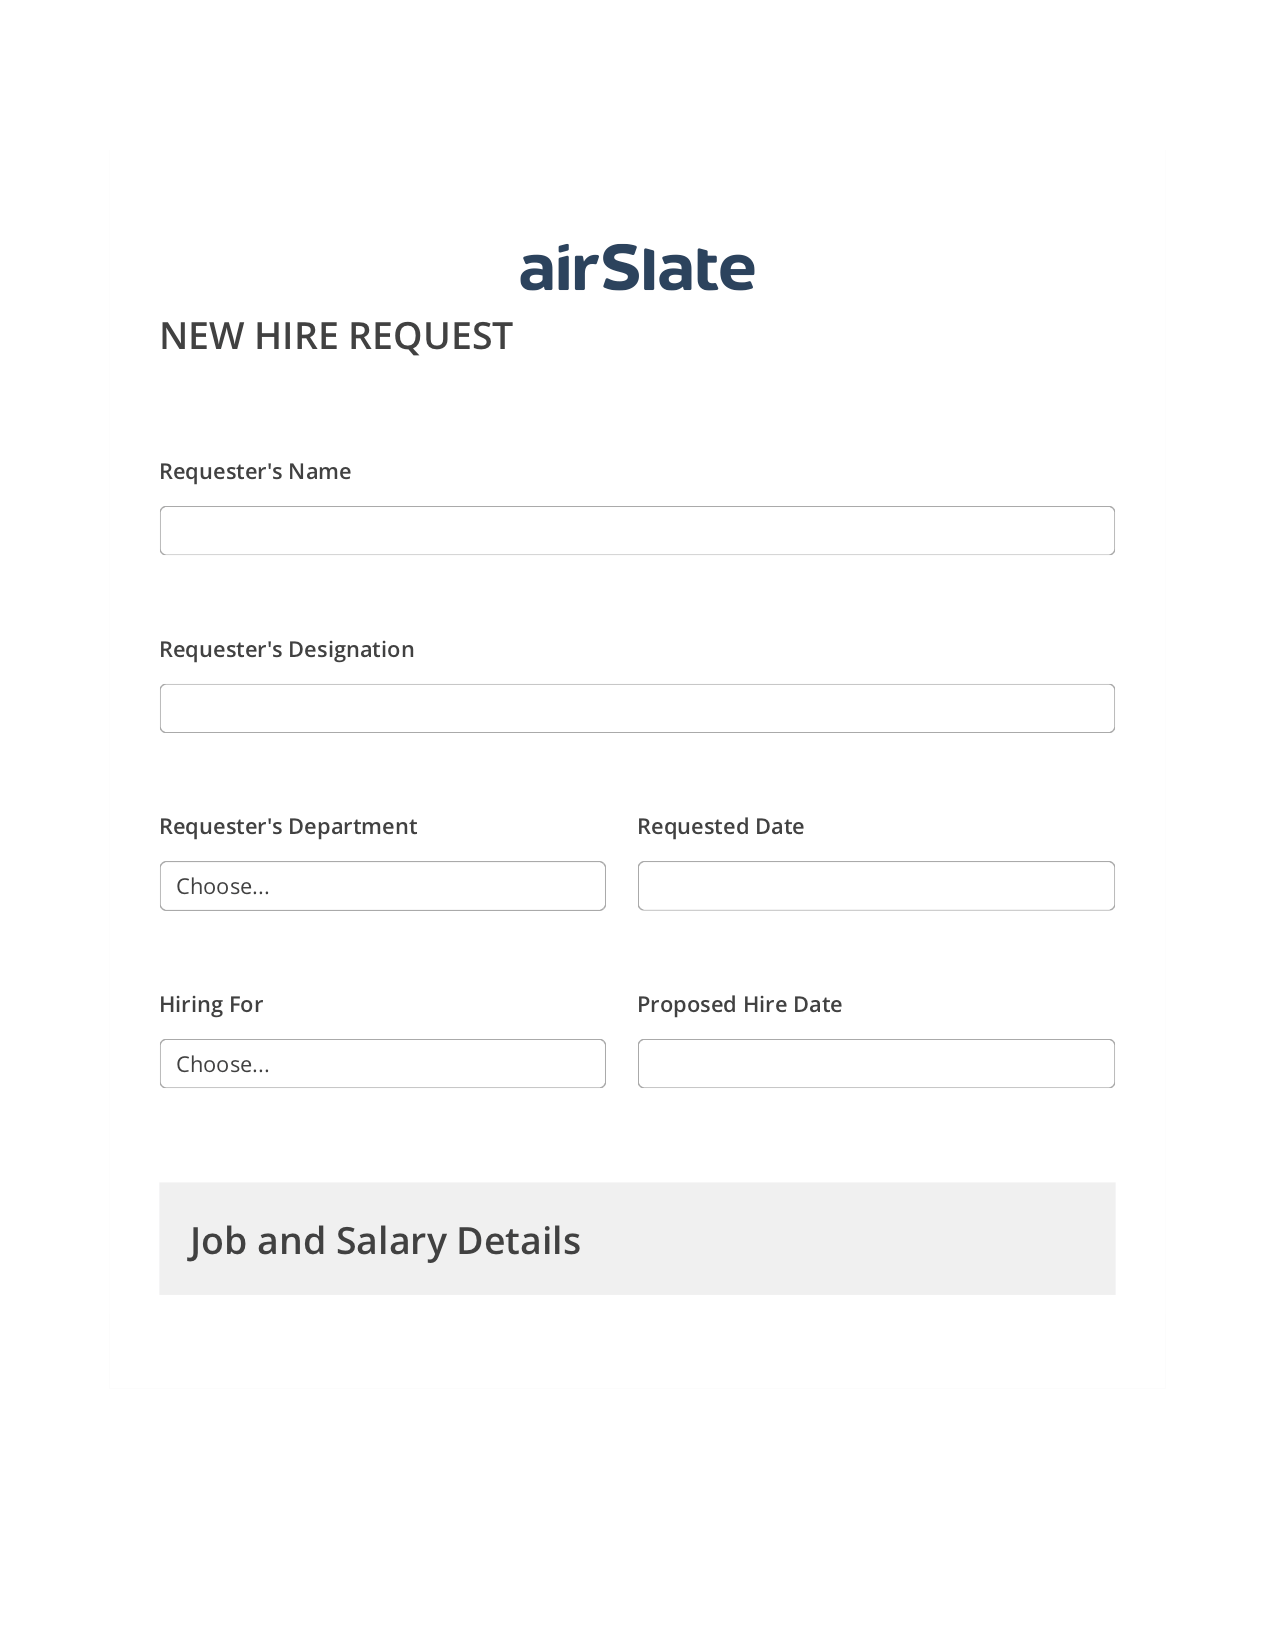 Hiring Request Workflow Pre-fill from another Slate Bot, Rename Slate Bot, Export to WebMerge Bot